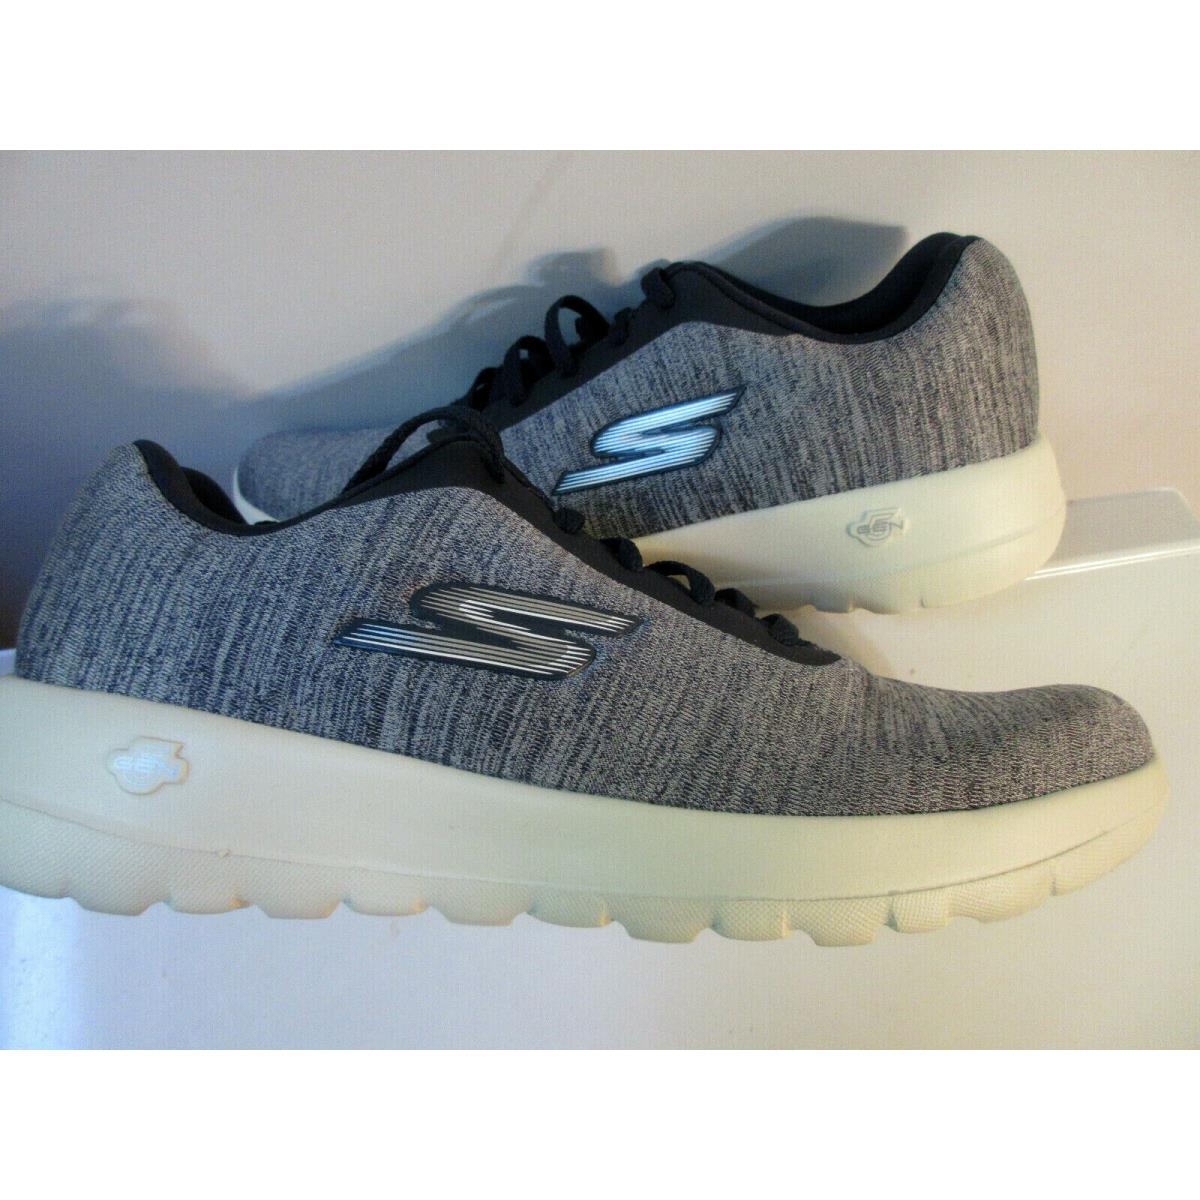 Skechers shoes Air Cooled GoGA Mat - Gray 0